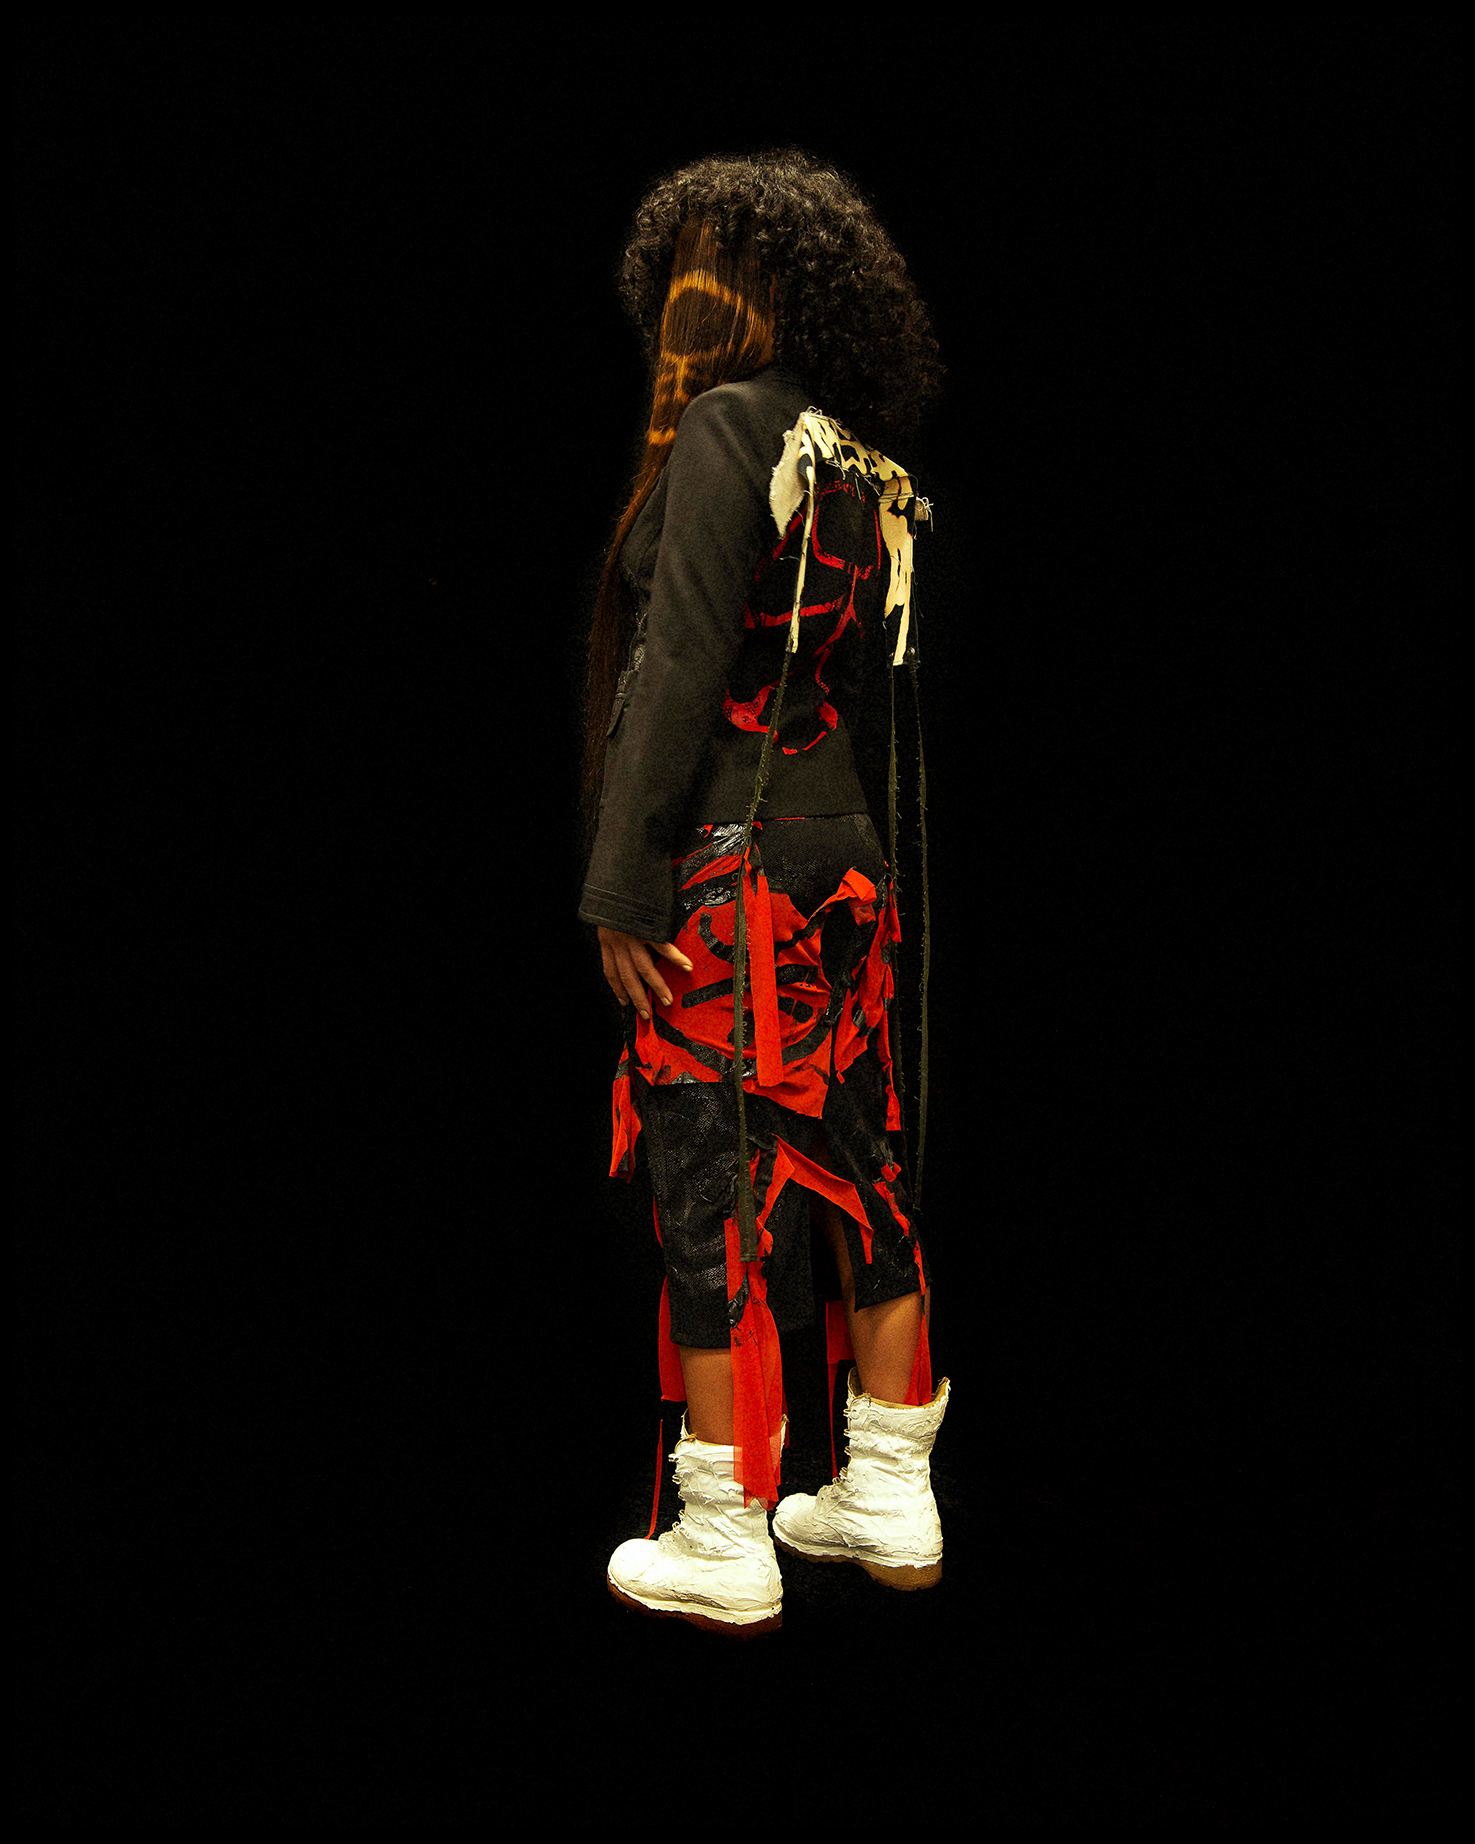 Full body shot of a model facing 3/4 turned away from the camera against a black background. She is wearing a distressed red and black outfit and white boots.